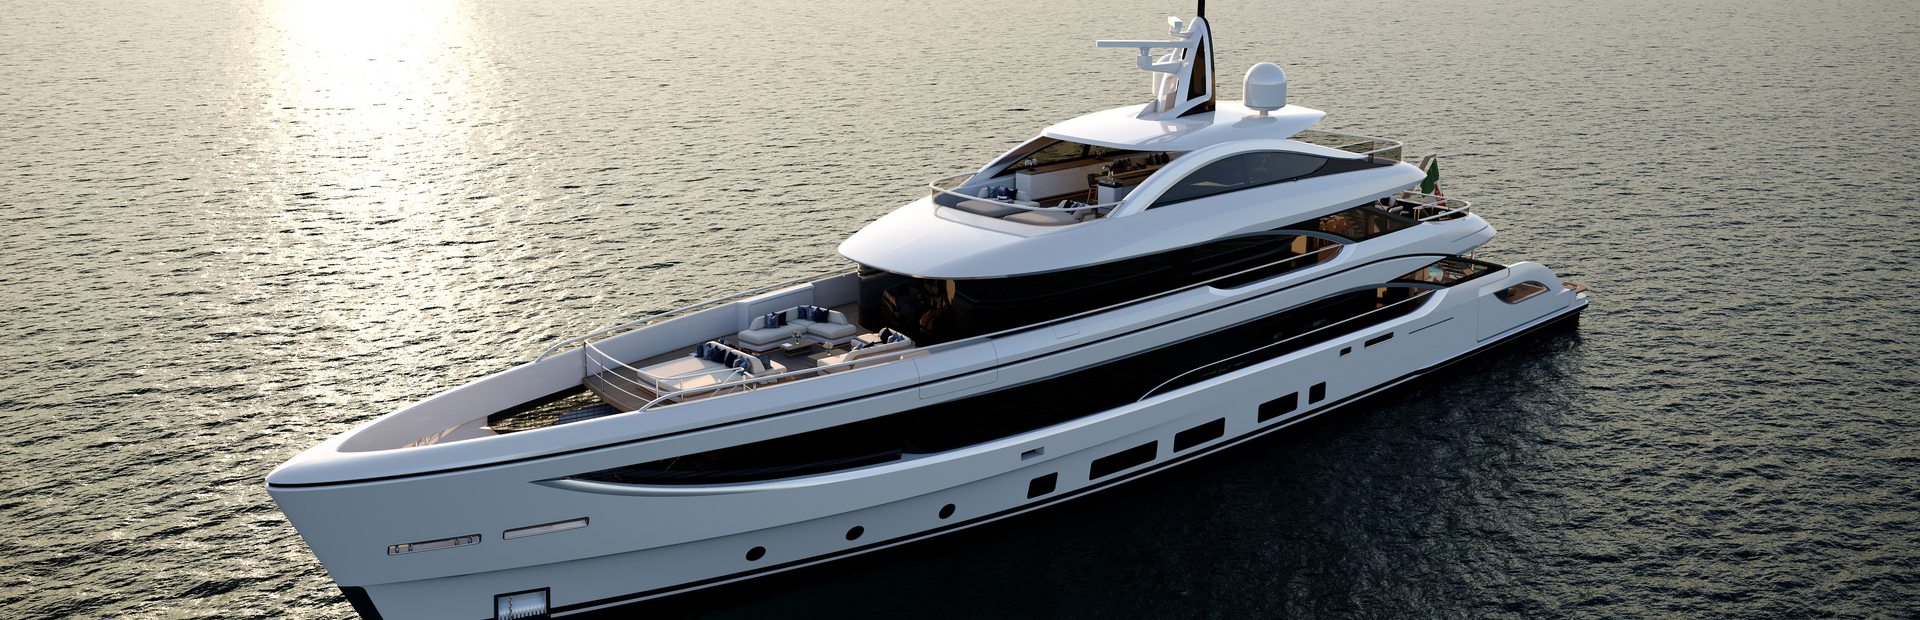 B.Now 50m Oasis Yacht